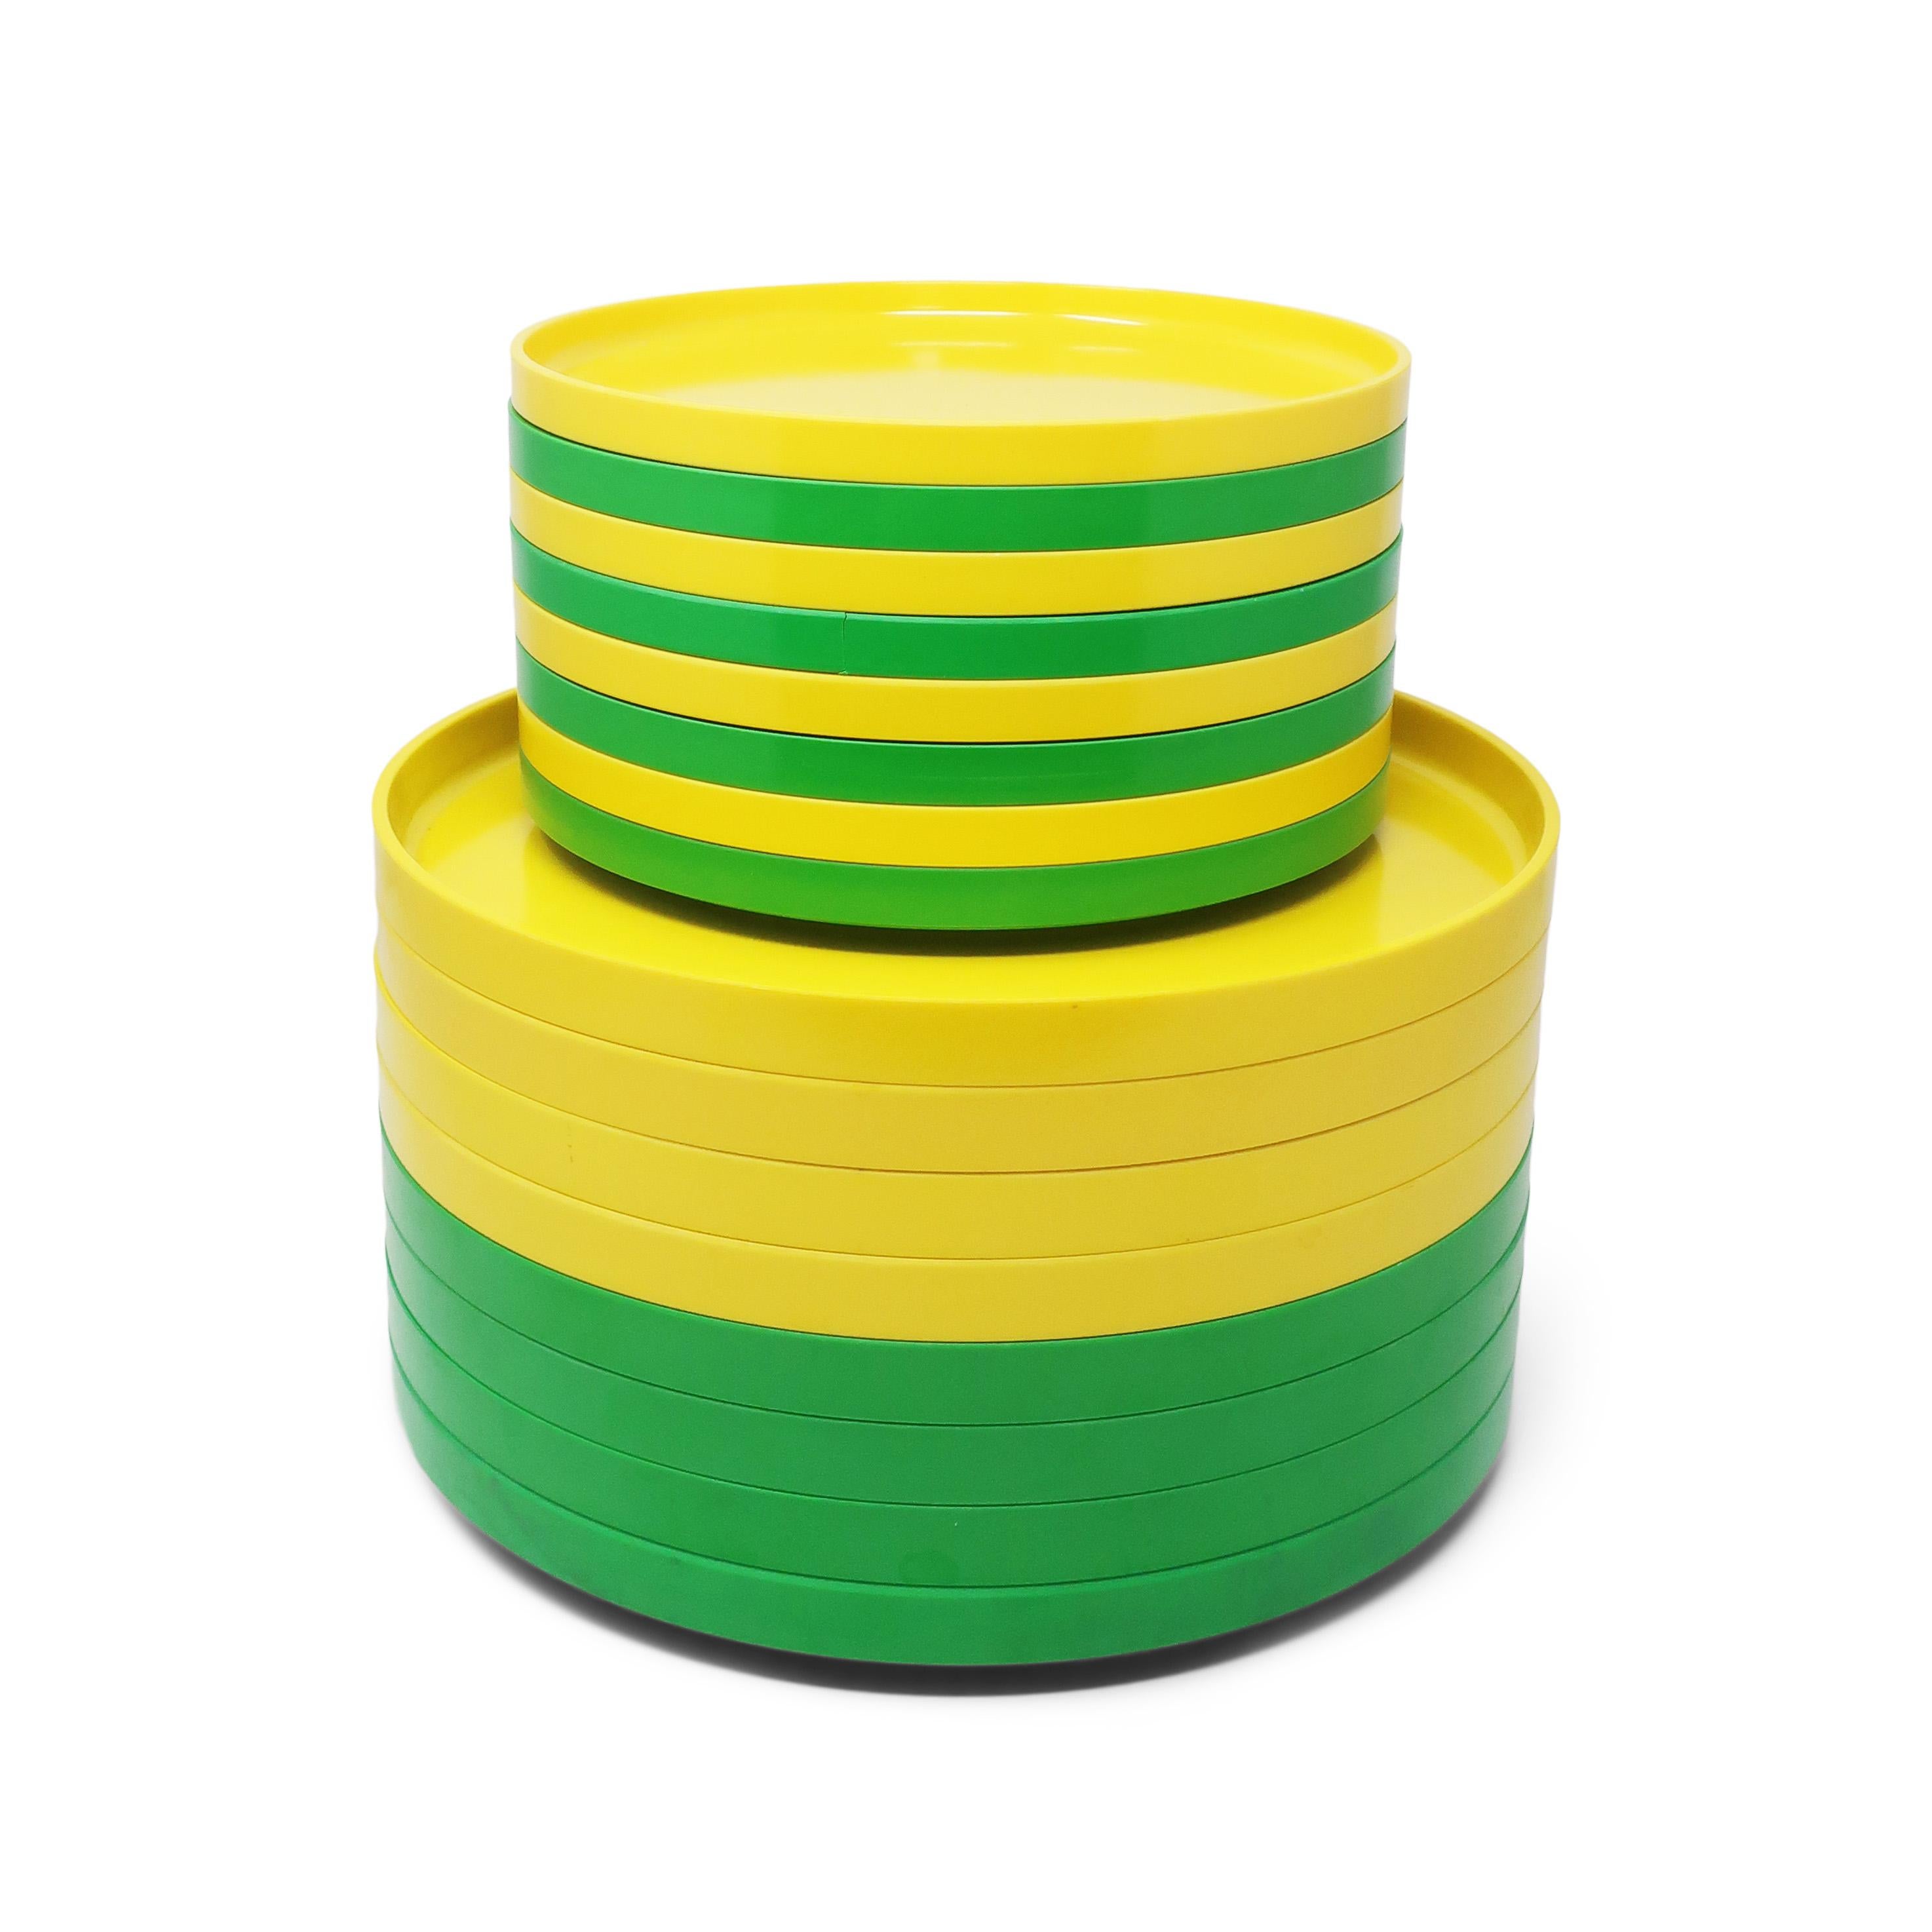 Post-Modern Green and Yellow Massimo Vignelli for Heller Plates - Set of 16